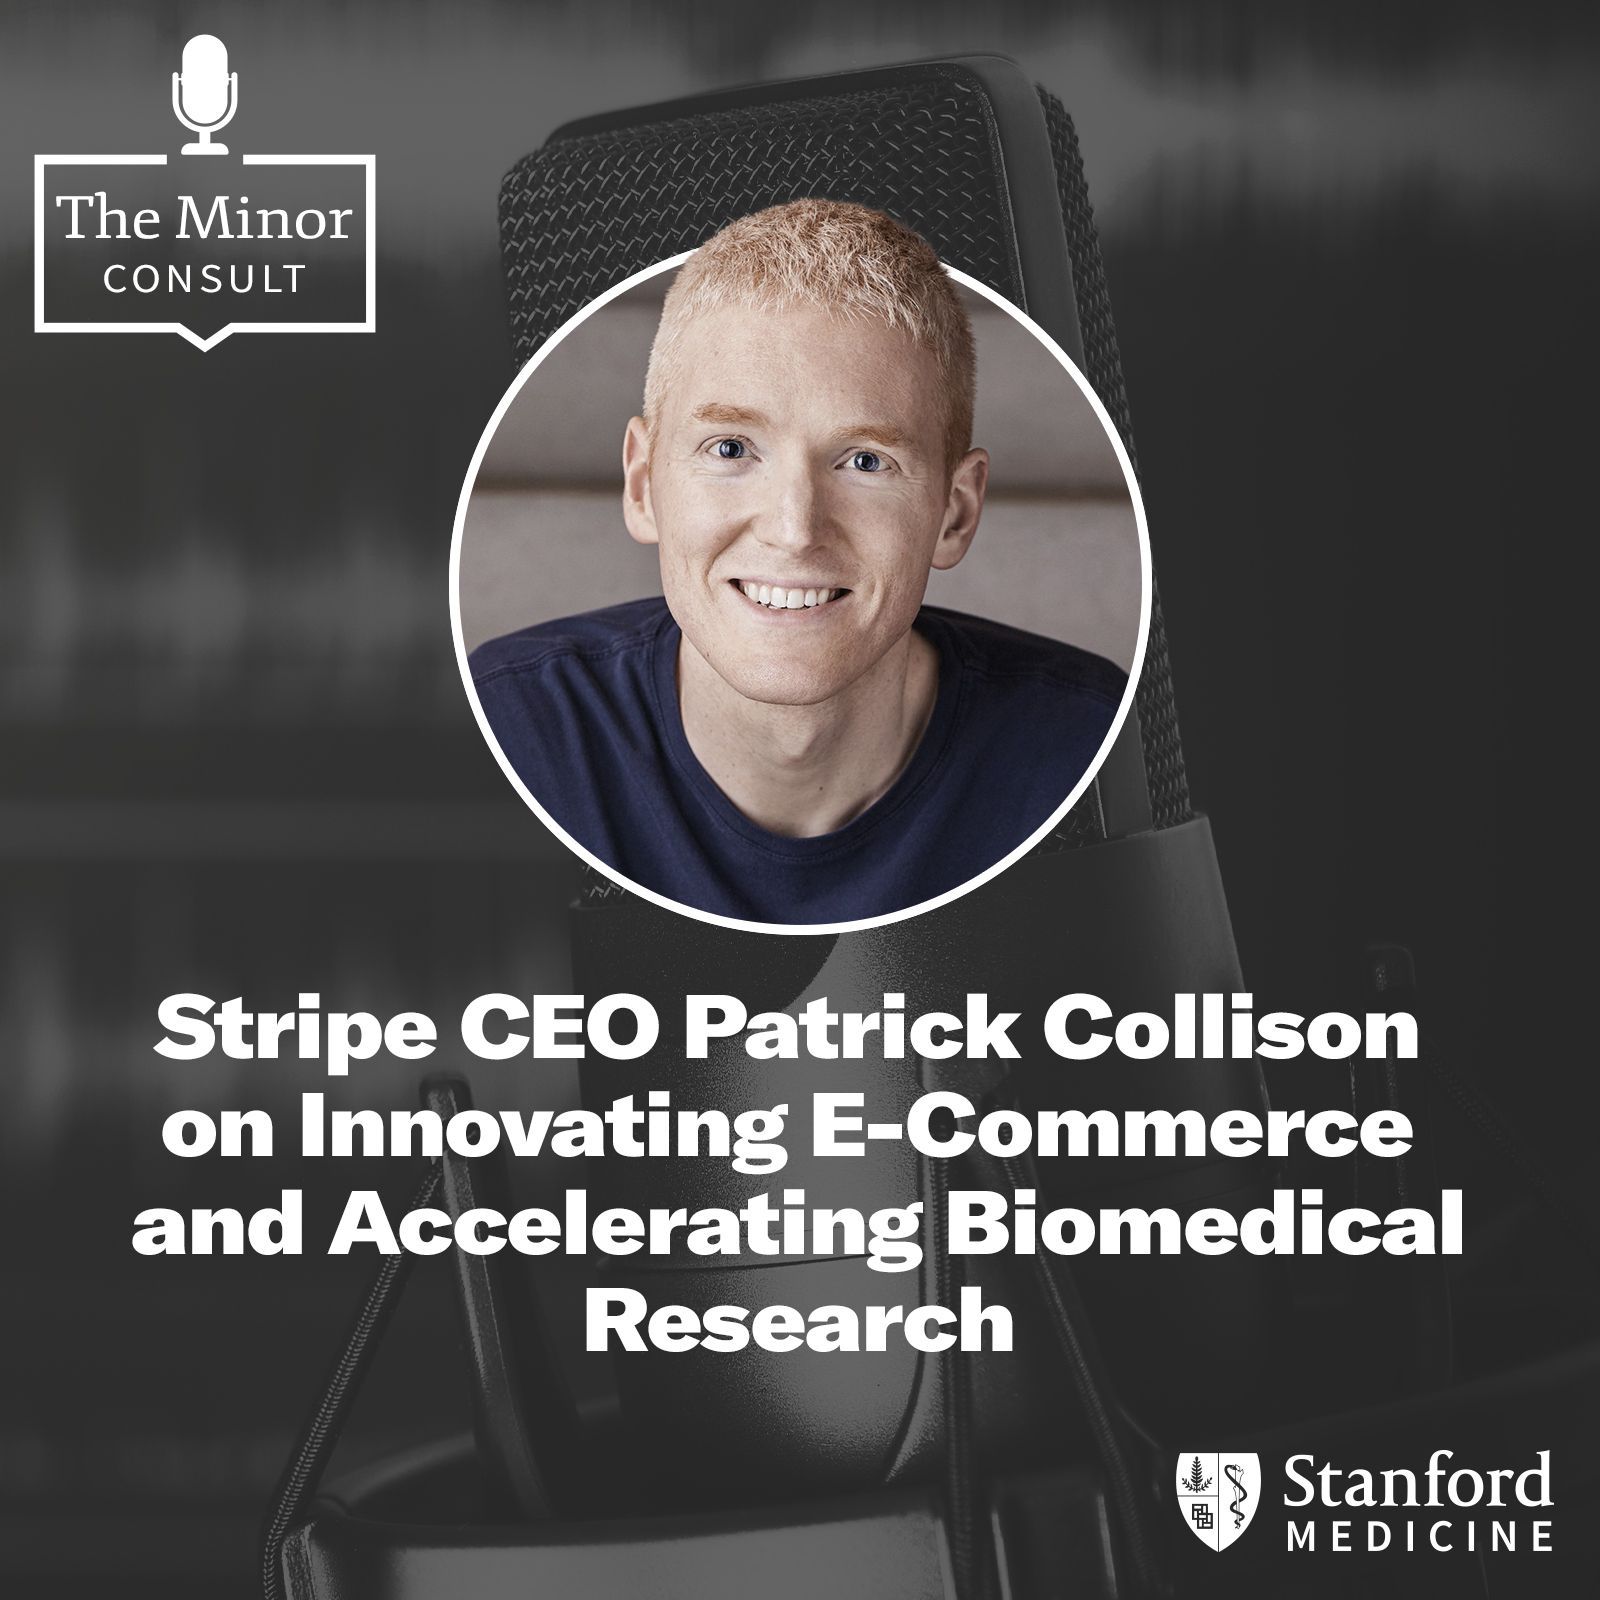 S4 Ep4: Stripe CEO Patrick Collison On Innovating E-Commerce & Accelerating Biomedical Research